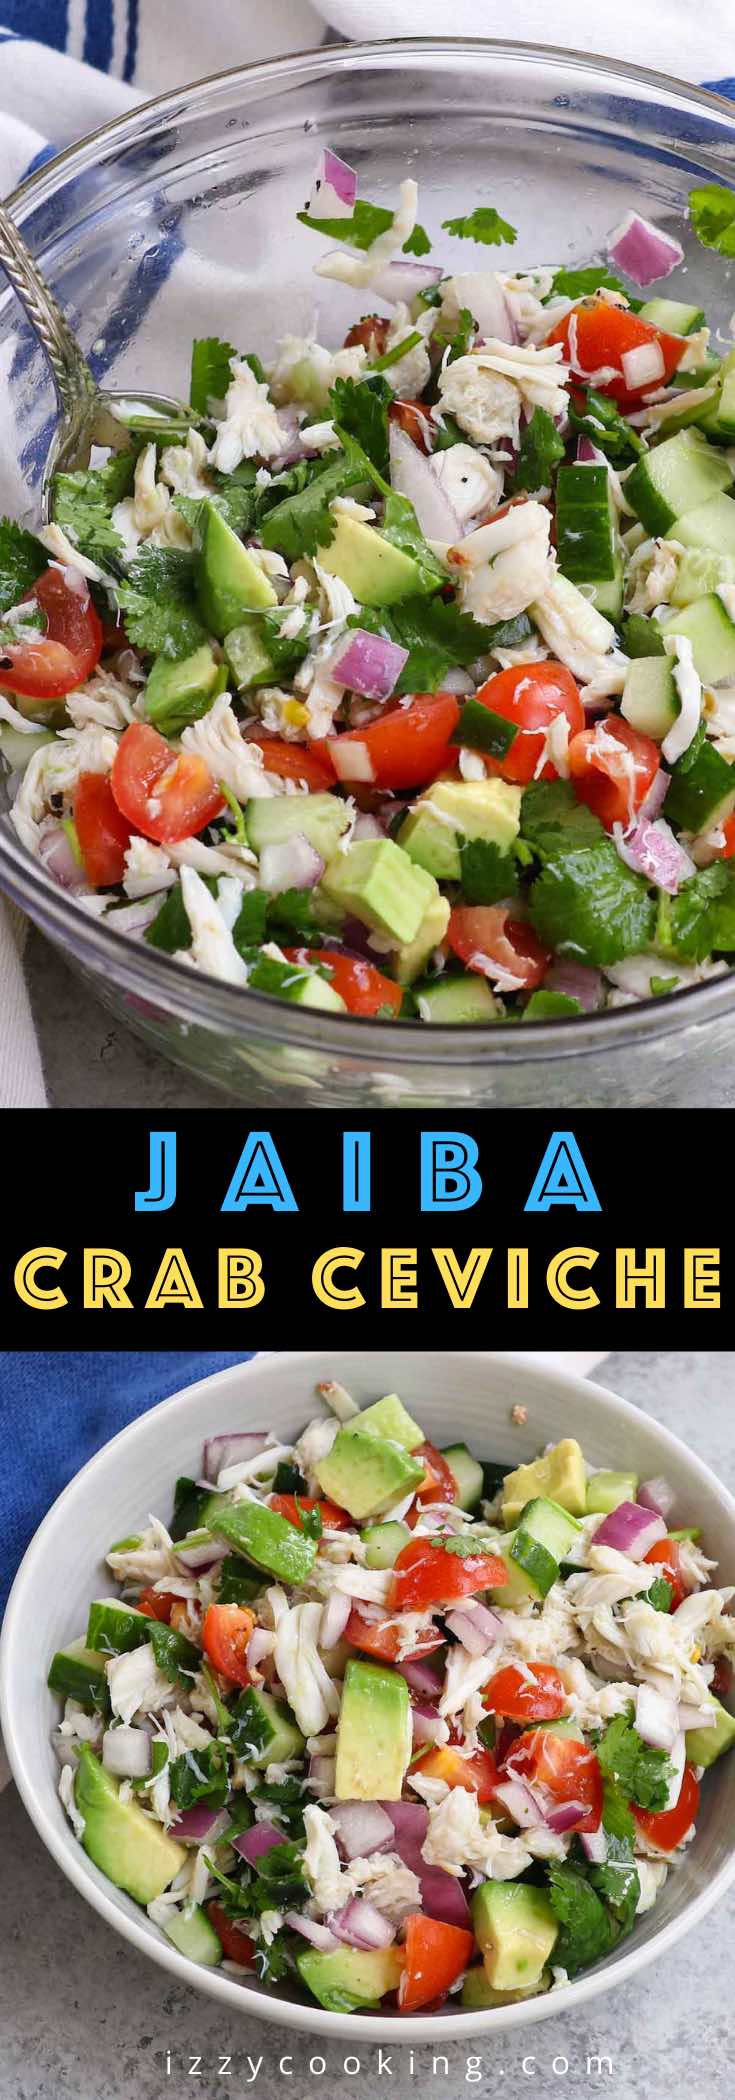 Refreshing, zesty and flavorful, Jaiba Ceviche is a tasty Mexican crab salad that’s enjoyed by seafood lovers in many Latin American and Caribbean countries.  Made with succulent crab meat, fresh lemon and lime juices and colorful Roma tomatoes, it’s a perfect summer side dish. You can use real crab meat such as blue crab or imitation crab meat for this easy recipe. 